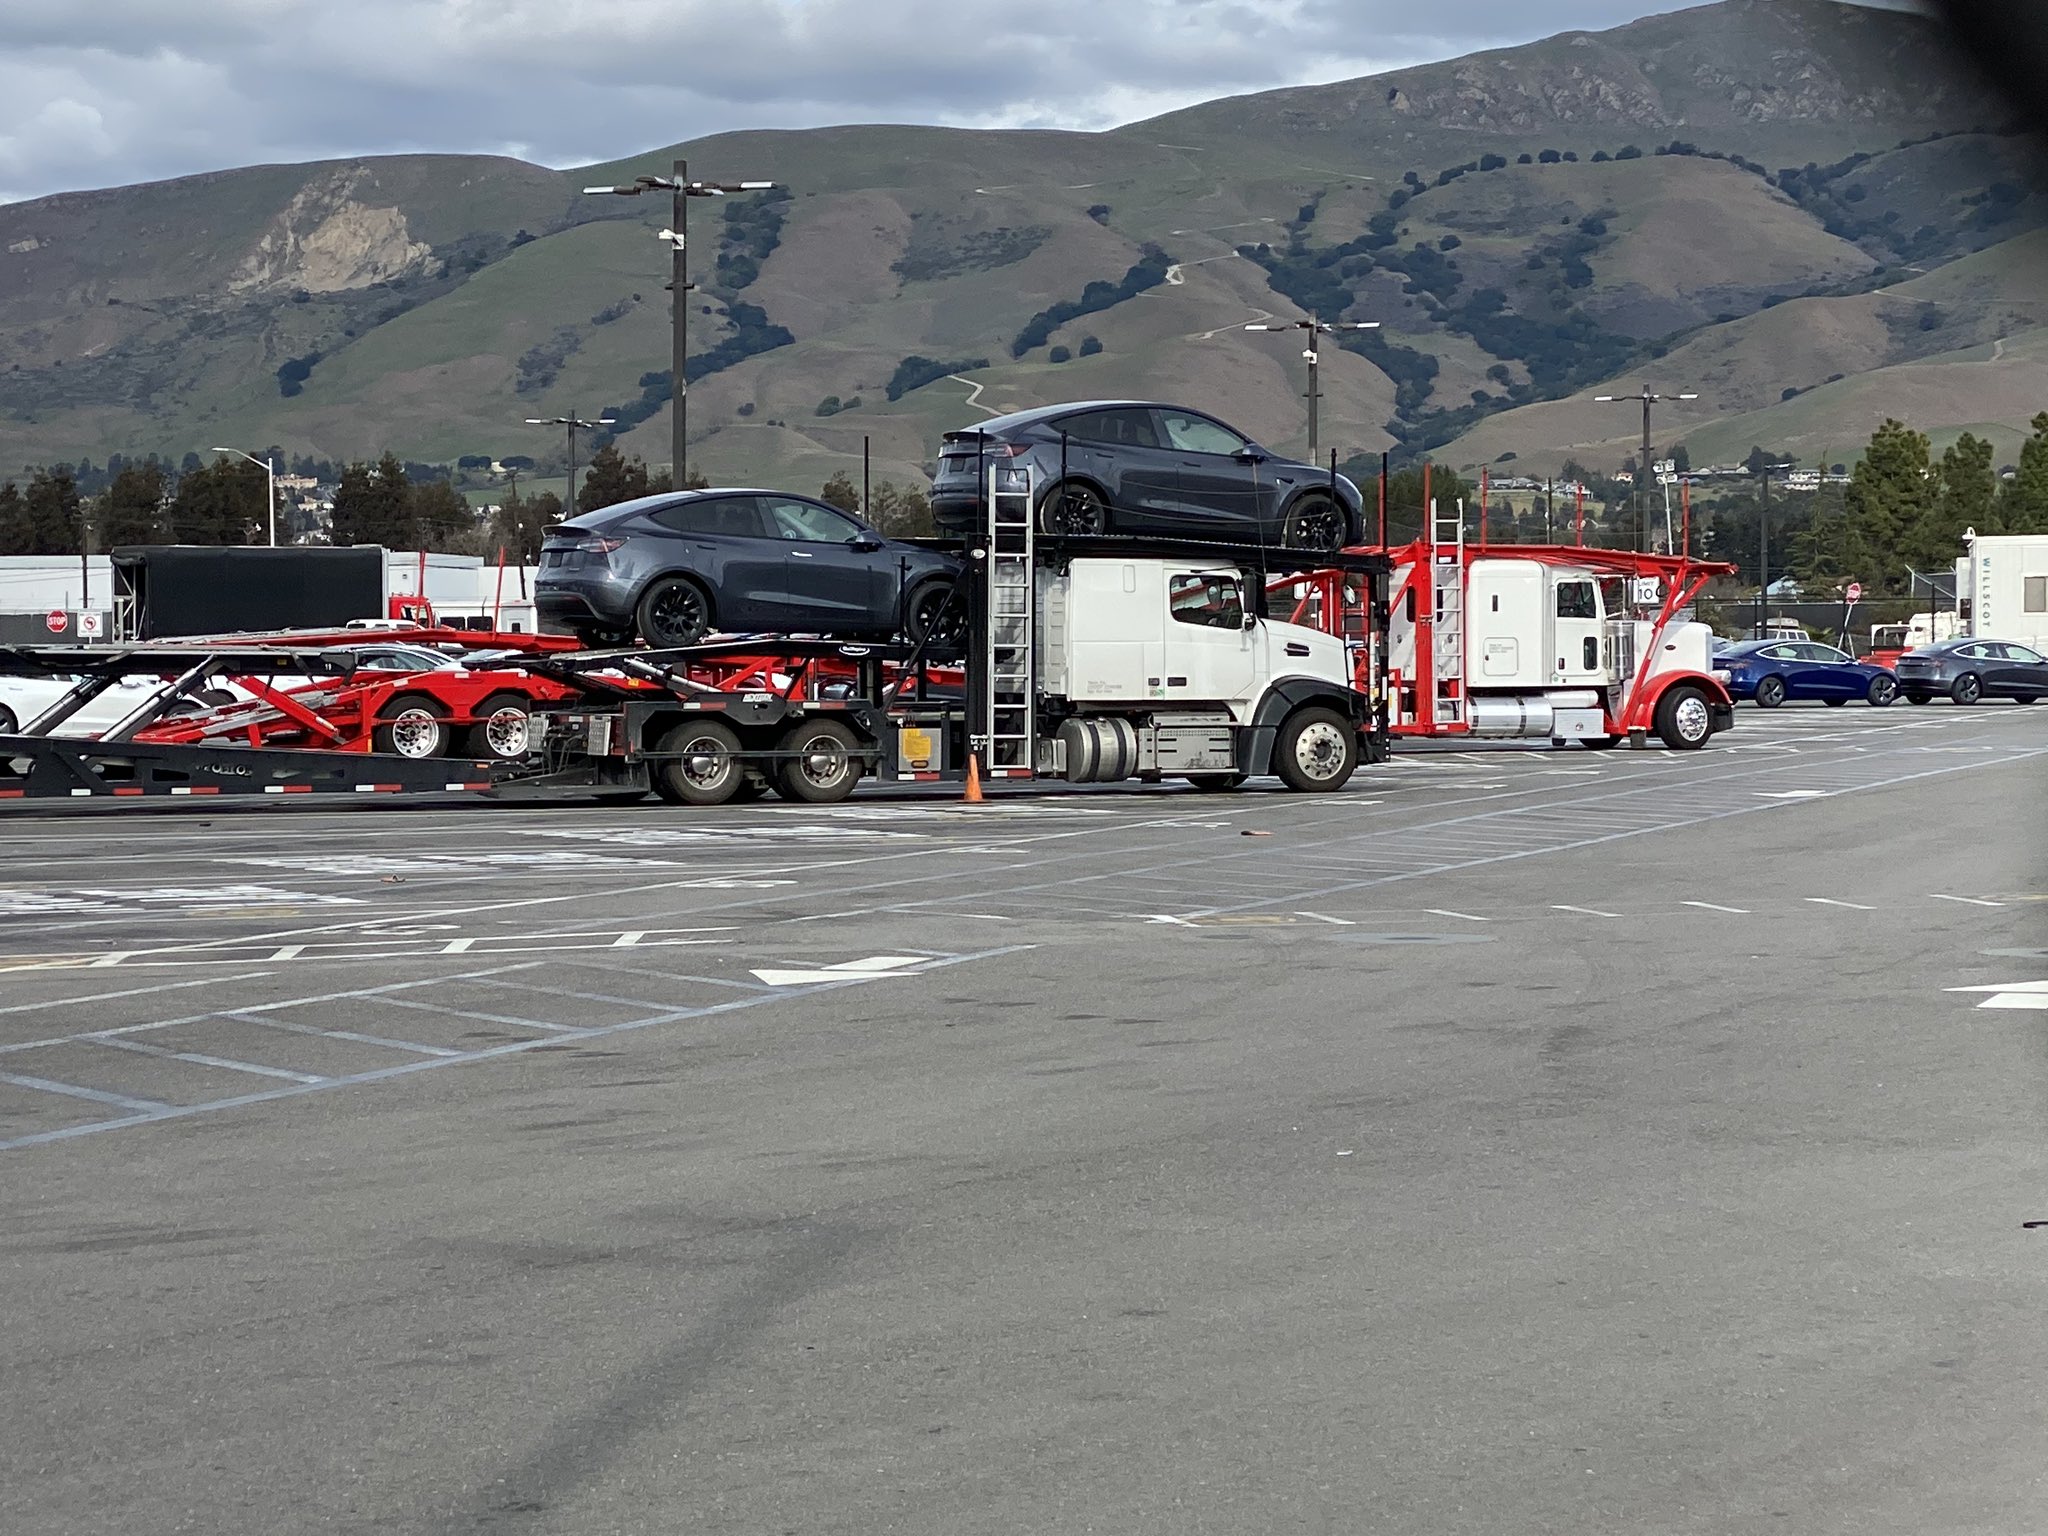 Tesla Model Y being loaded onto car carriers at the Fremont factory